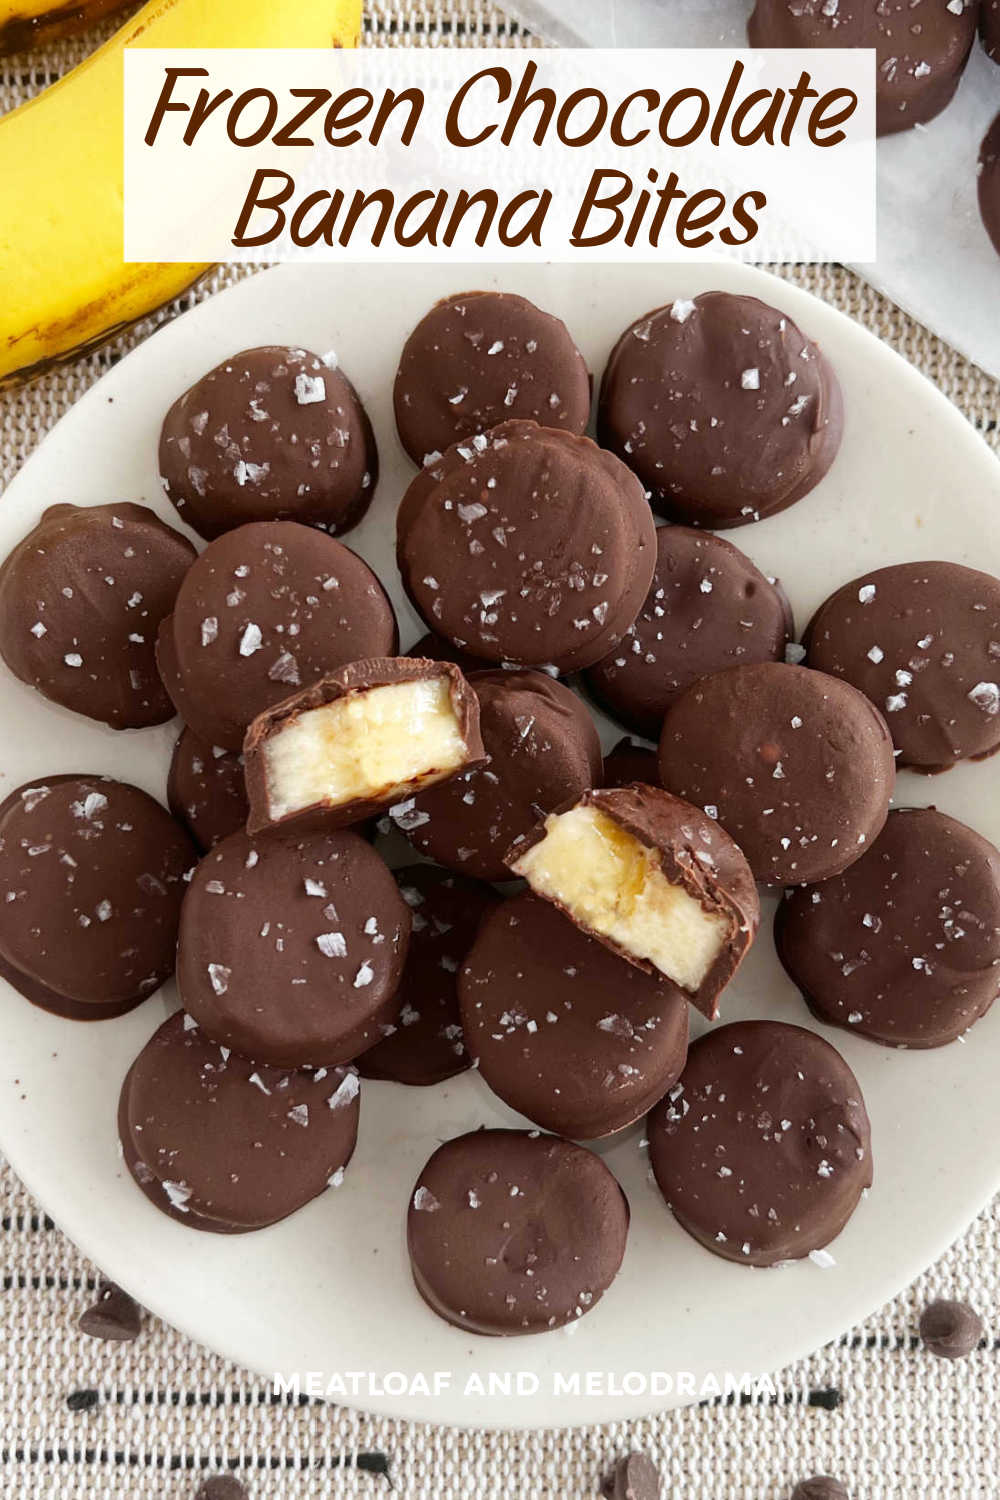 This Frozen Chocolate Banana Bites Recipe is an easy treat made with banana slices dipped in melted chocolate and frozen solid. A healthy snack that tastes like ice cream and is perfect for summer! via @meamel